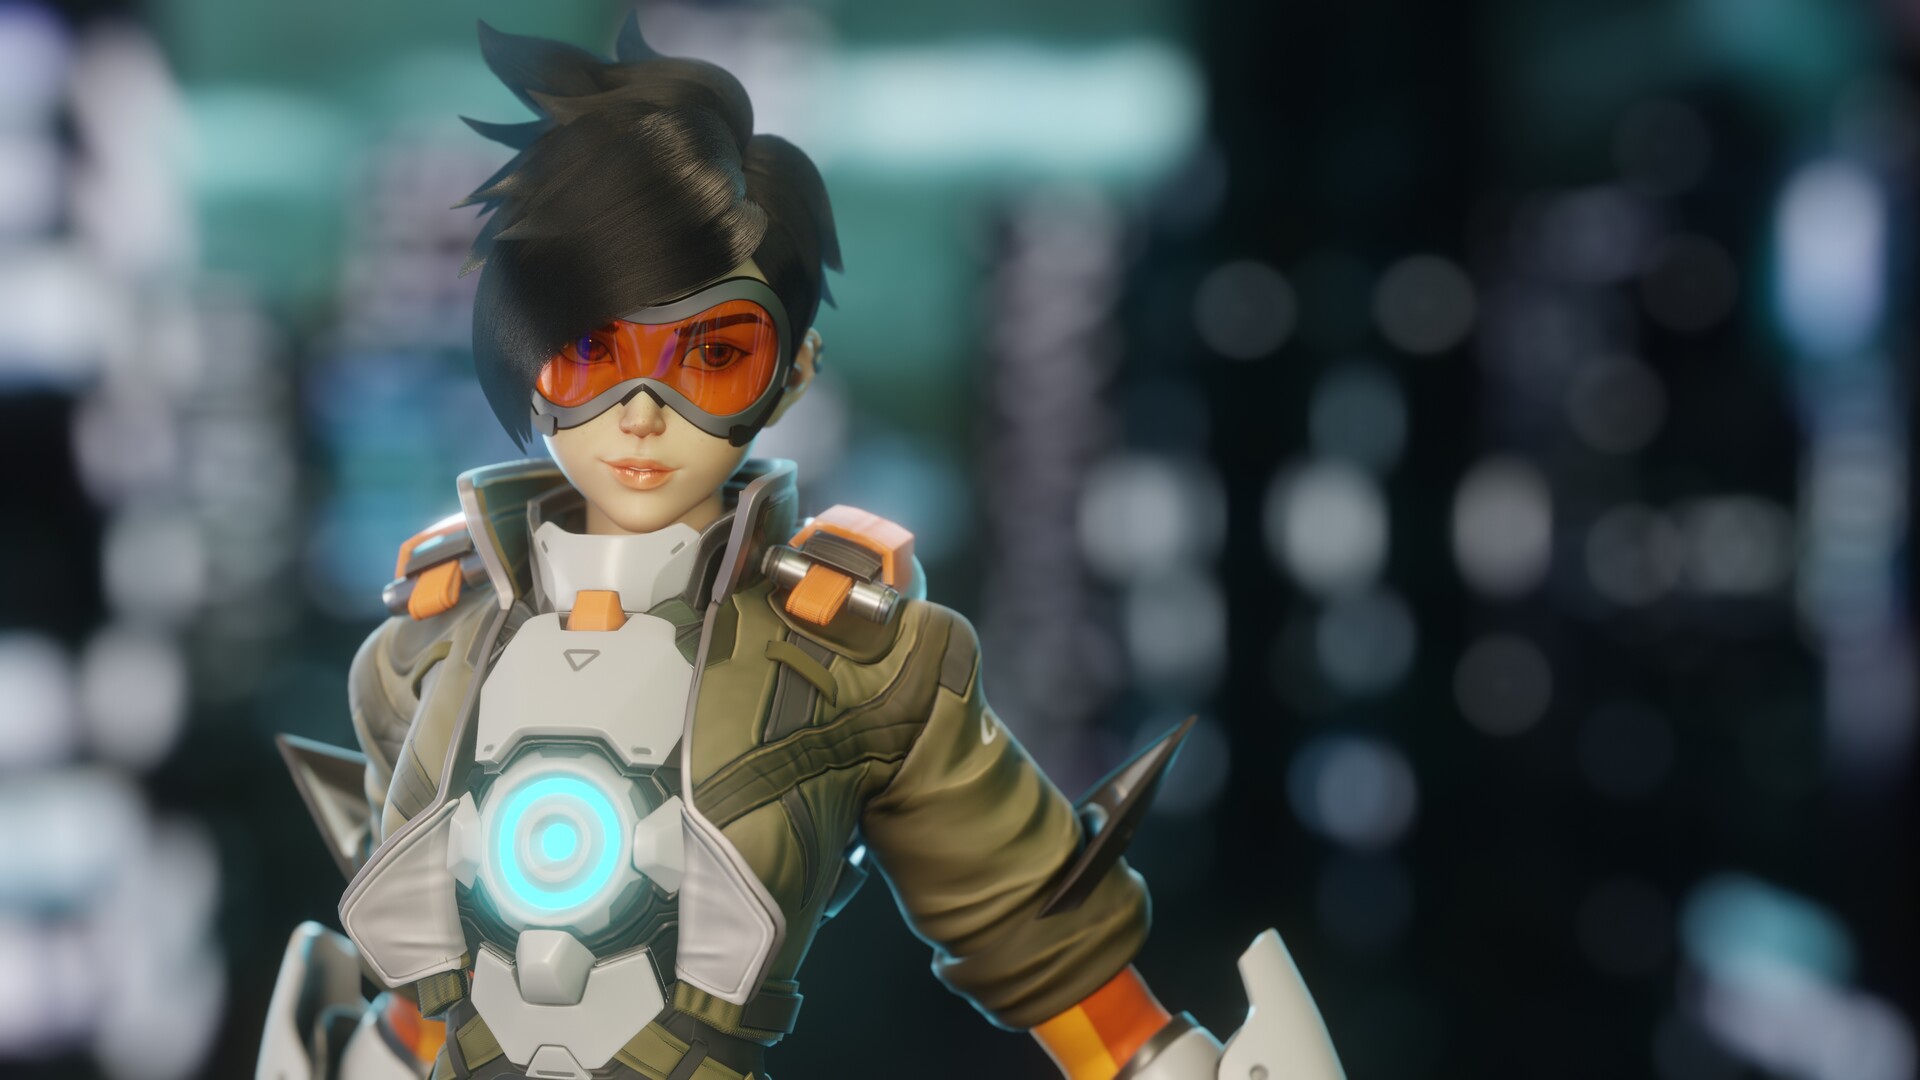 tracer from overwatch in a cheerleader outfit, promo, Stable Diffusion